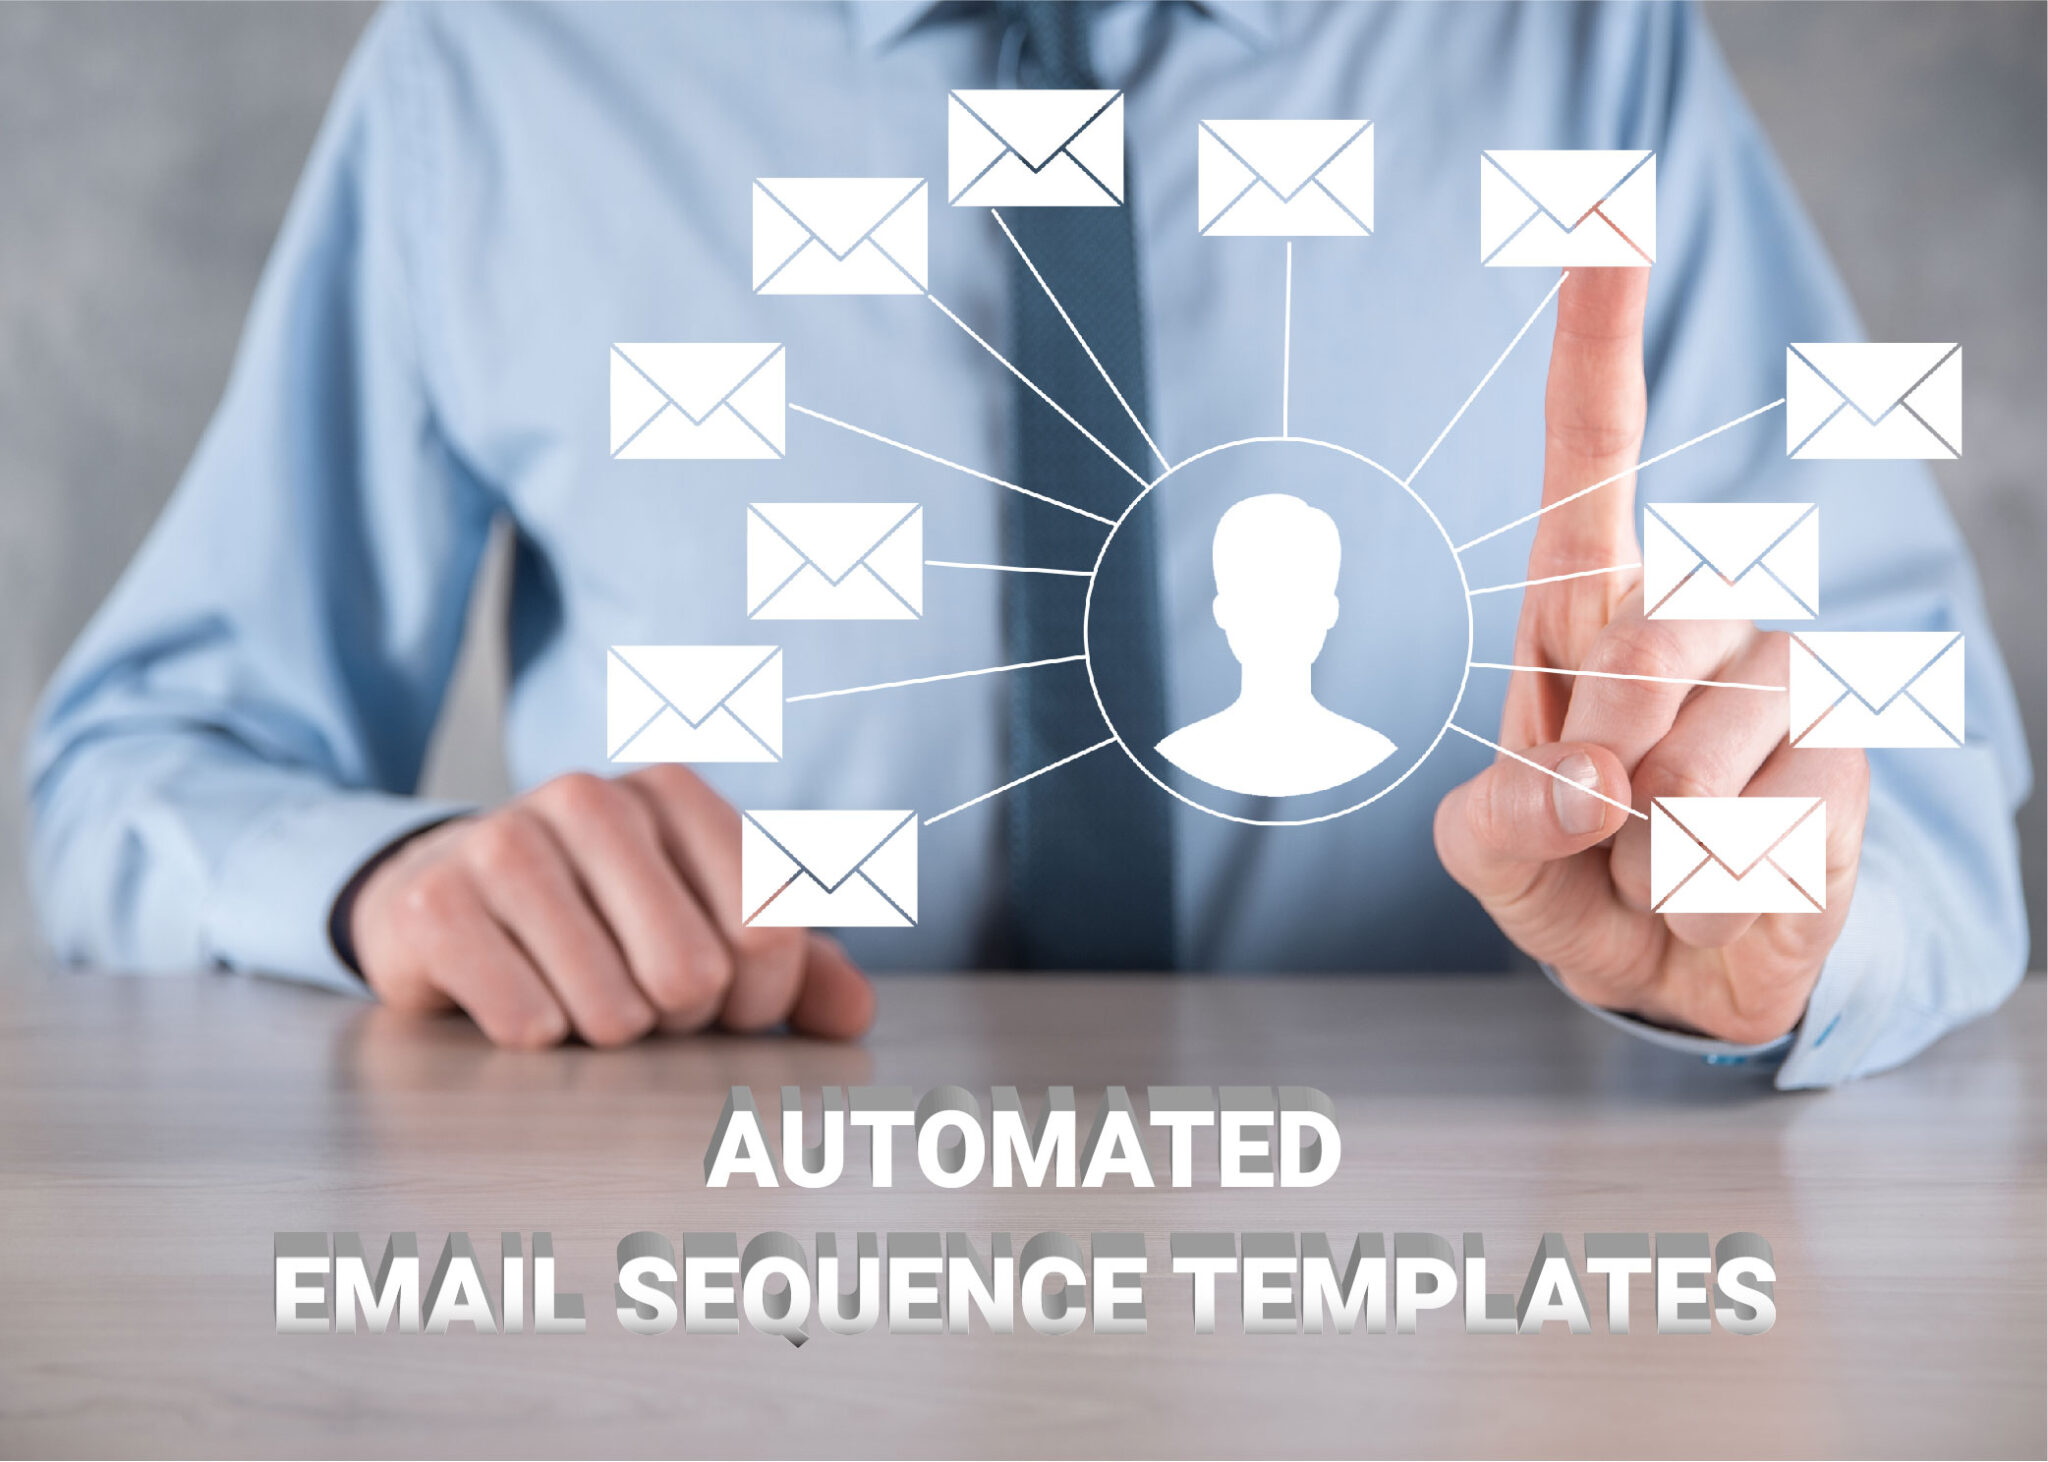 7 Email Sequence Templates to Improve Sales Conversion